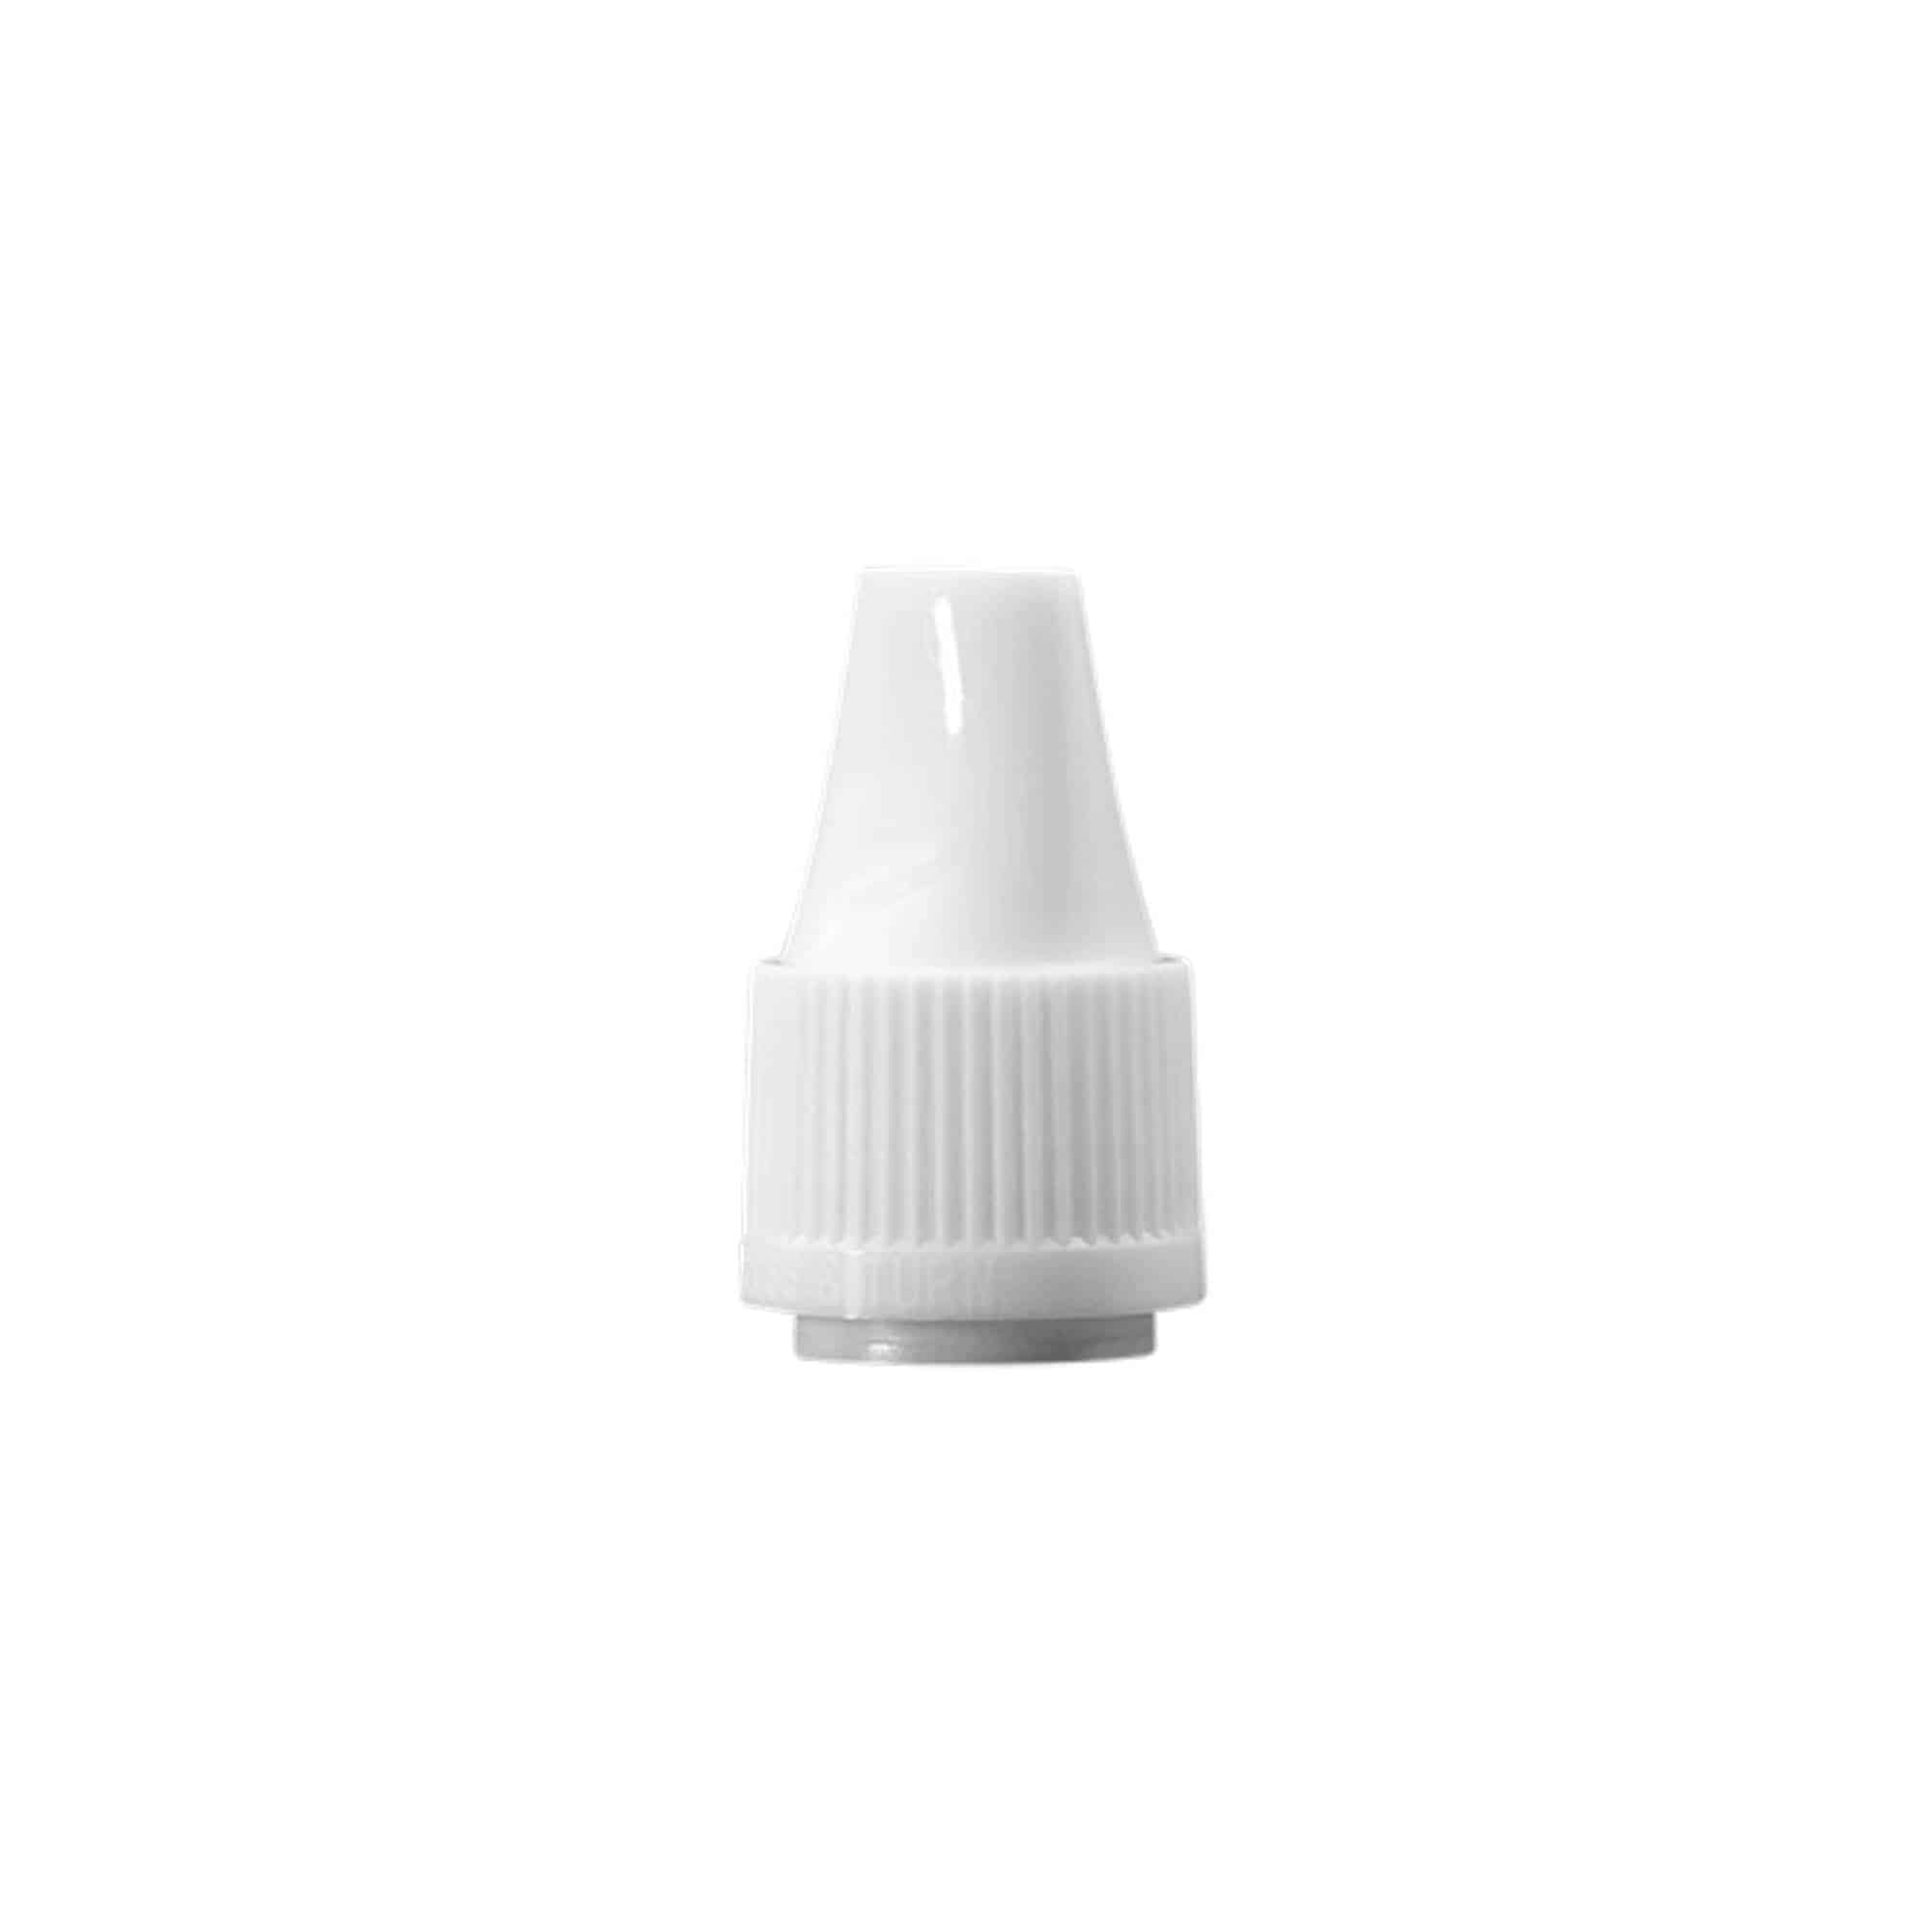 Screw cap with quality seal and child safety lock for 'E-Liquid', PP plastic, white